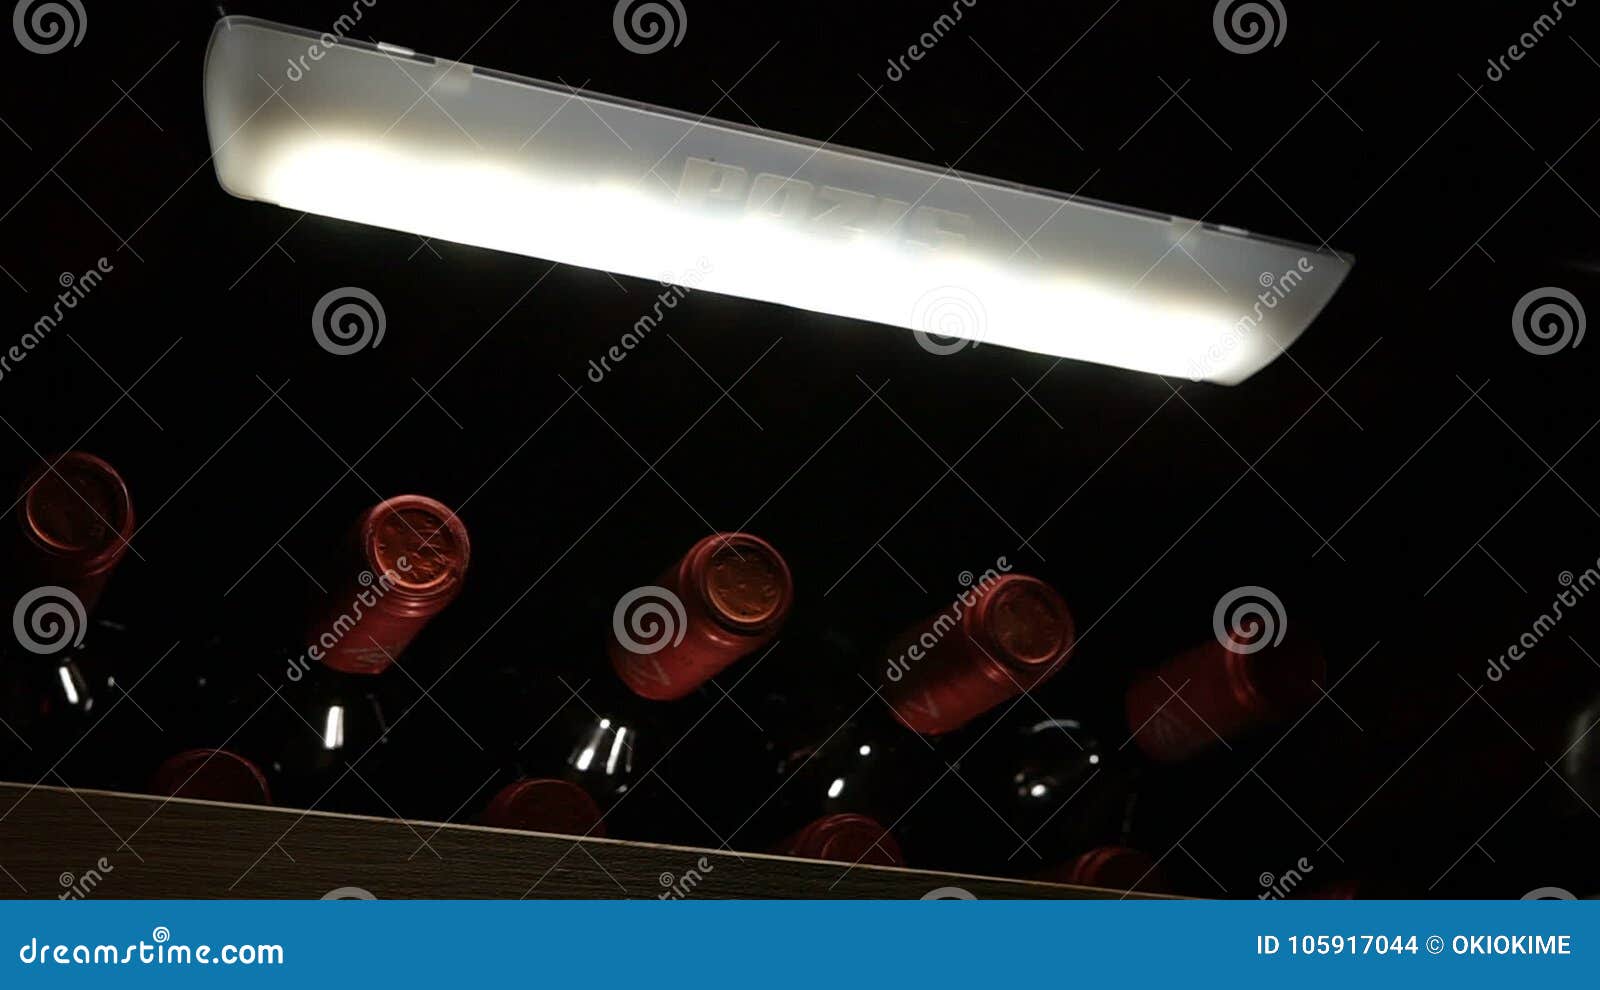 Motion Past Wine Cabinet With Bottles And Pozis Logo Lamp Stock